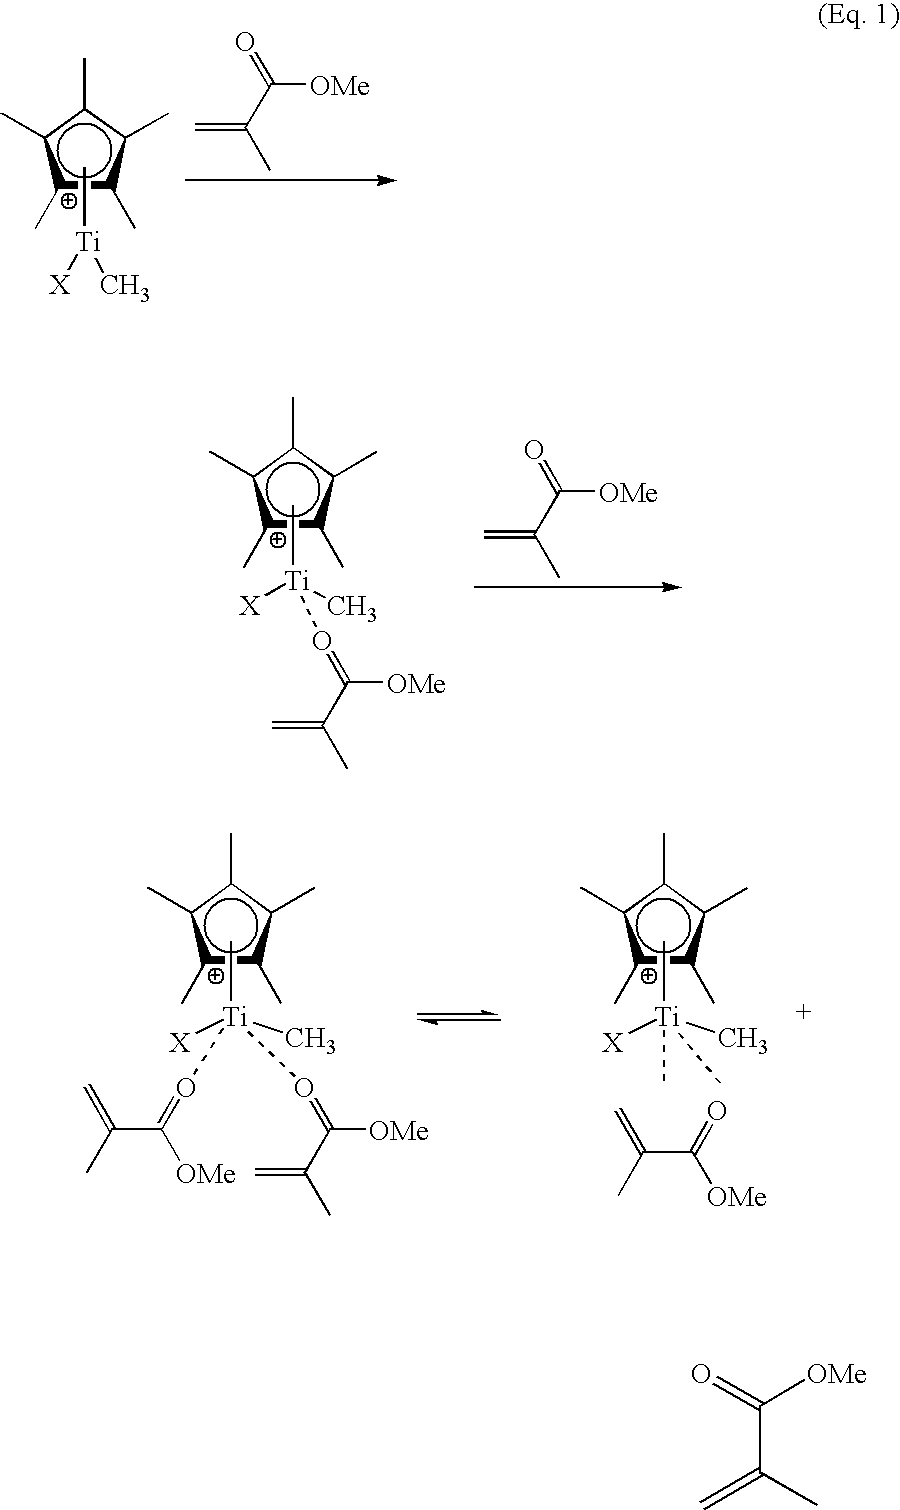 Cyclopentadienyl-containing low-valent early transition metal olefin polymerization catalysts